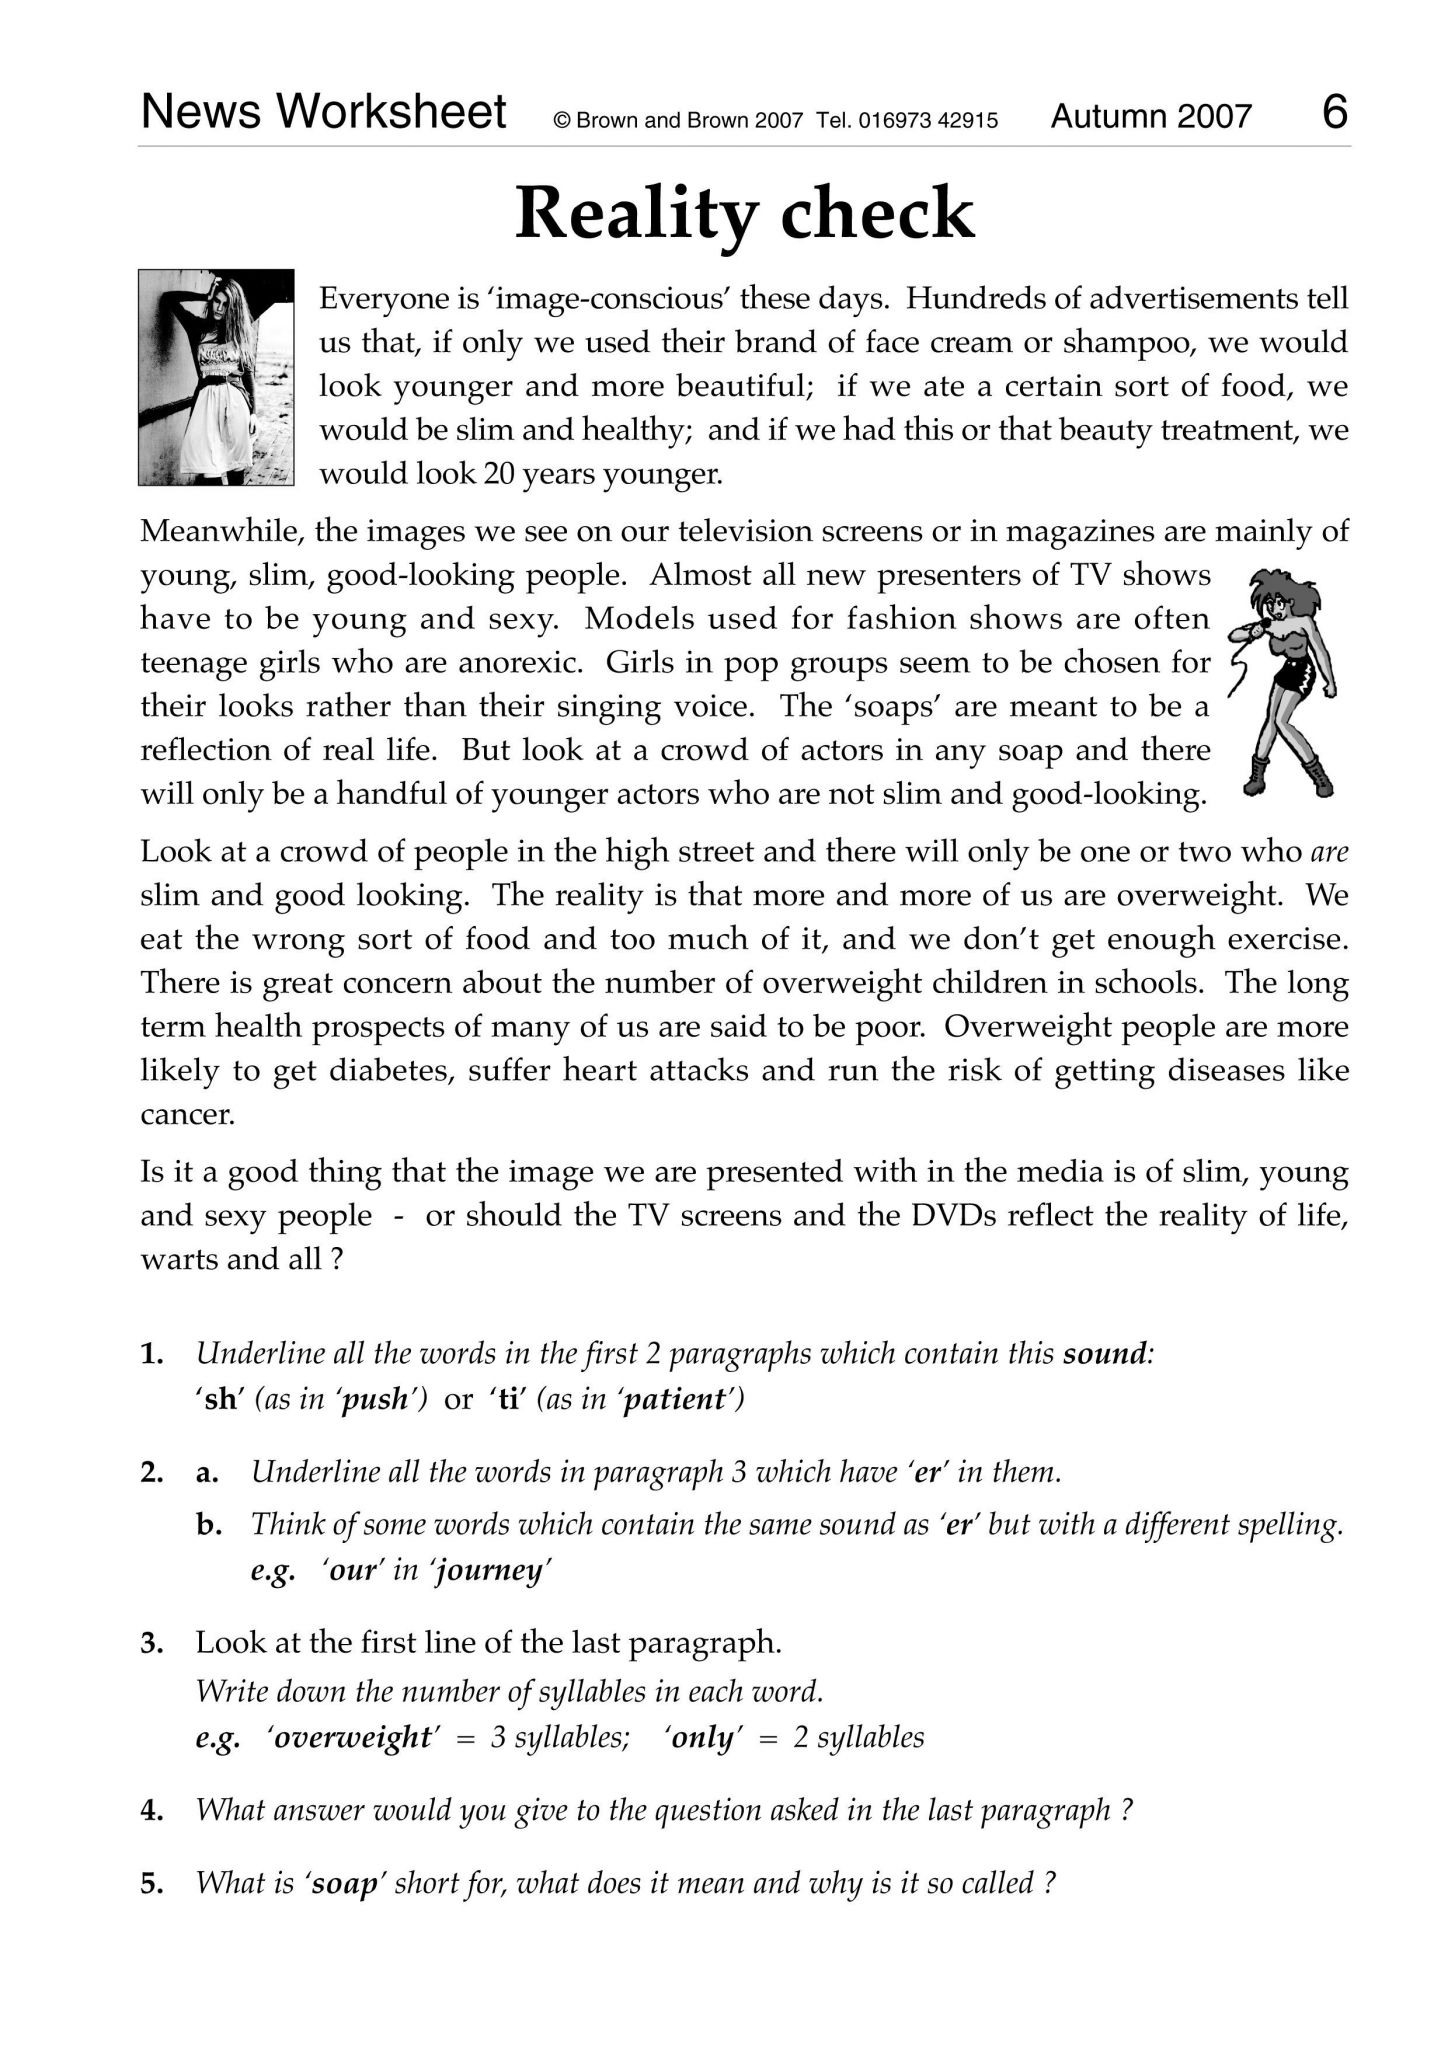 4th Grade Reading Comprehension Worksheets Pdf For Free Db Excelcom 